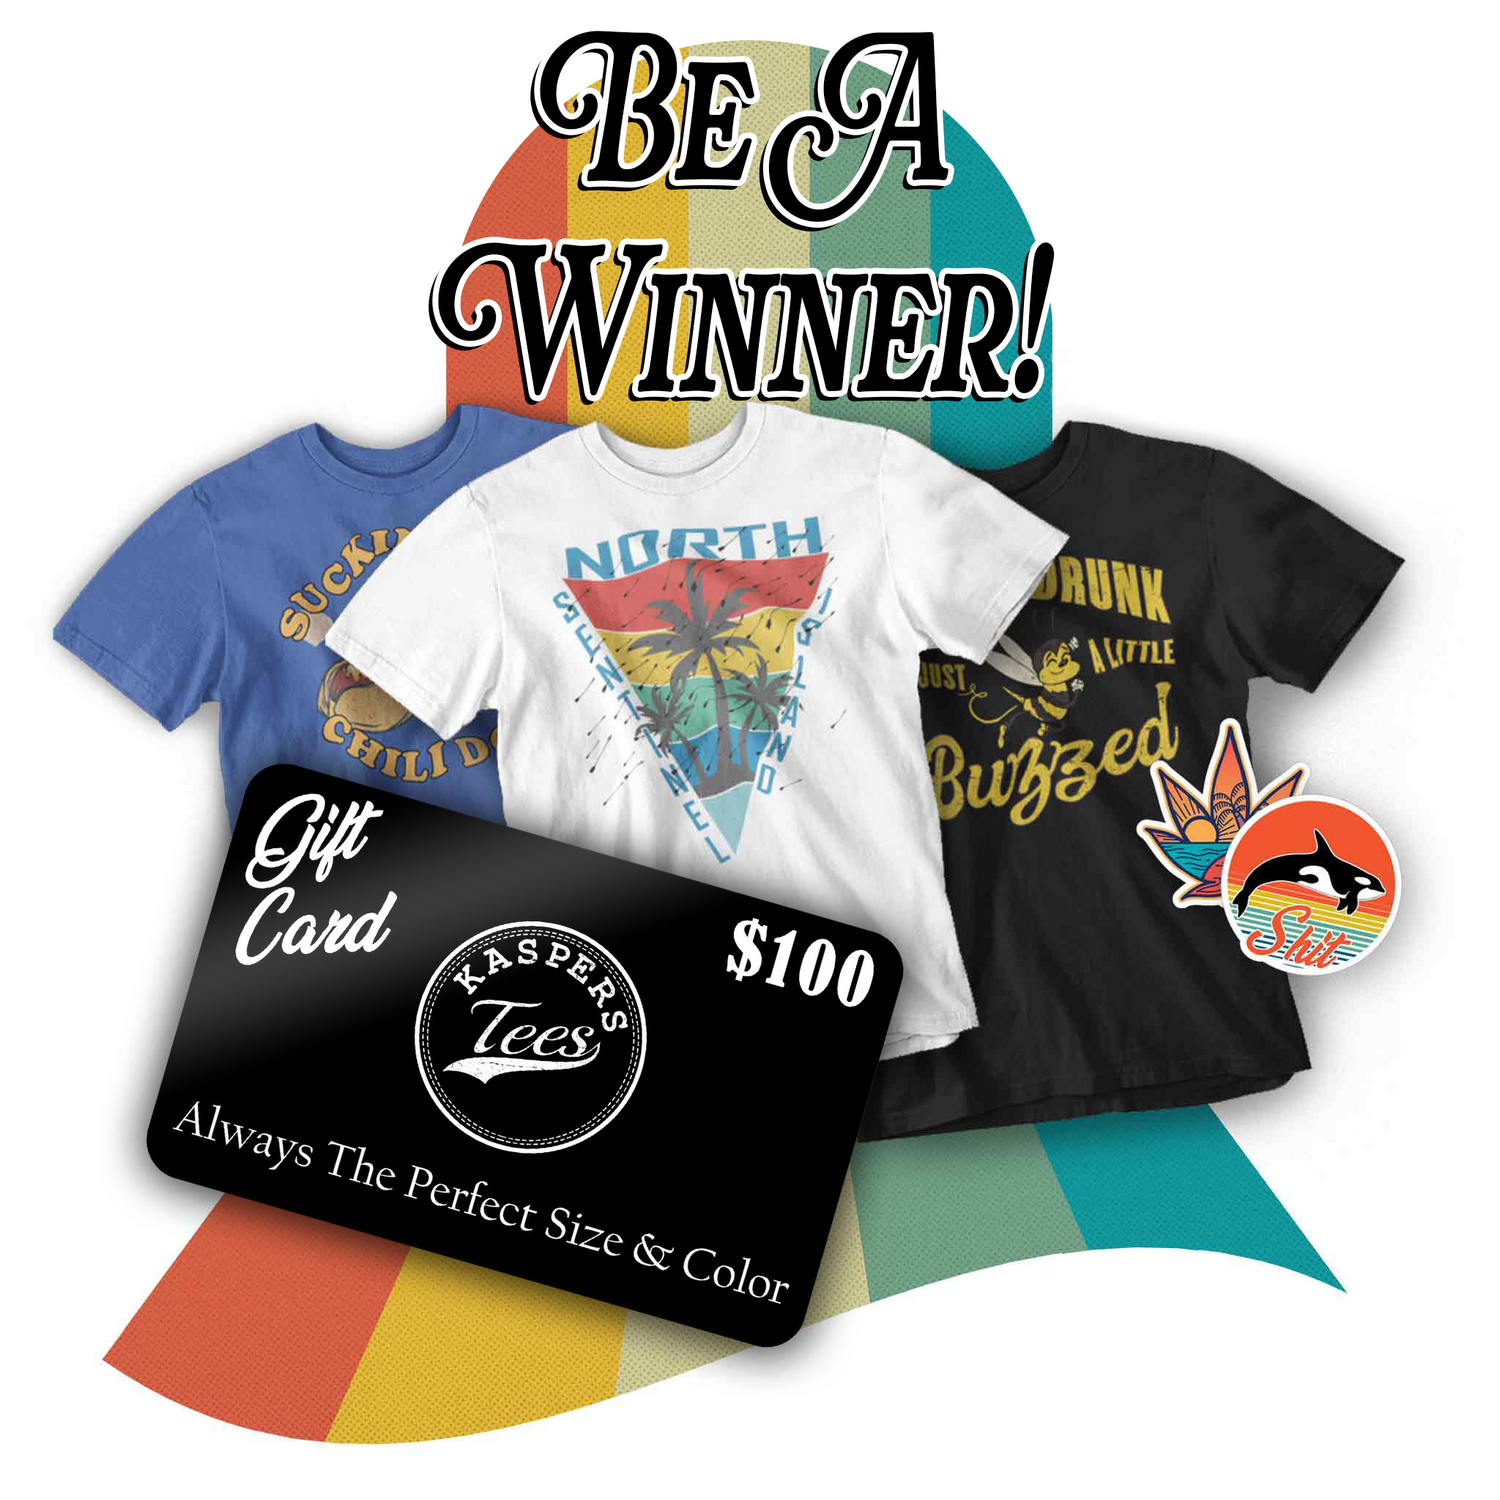 Kasper Tees $100 Gift Card Giveaway Promo Poster